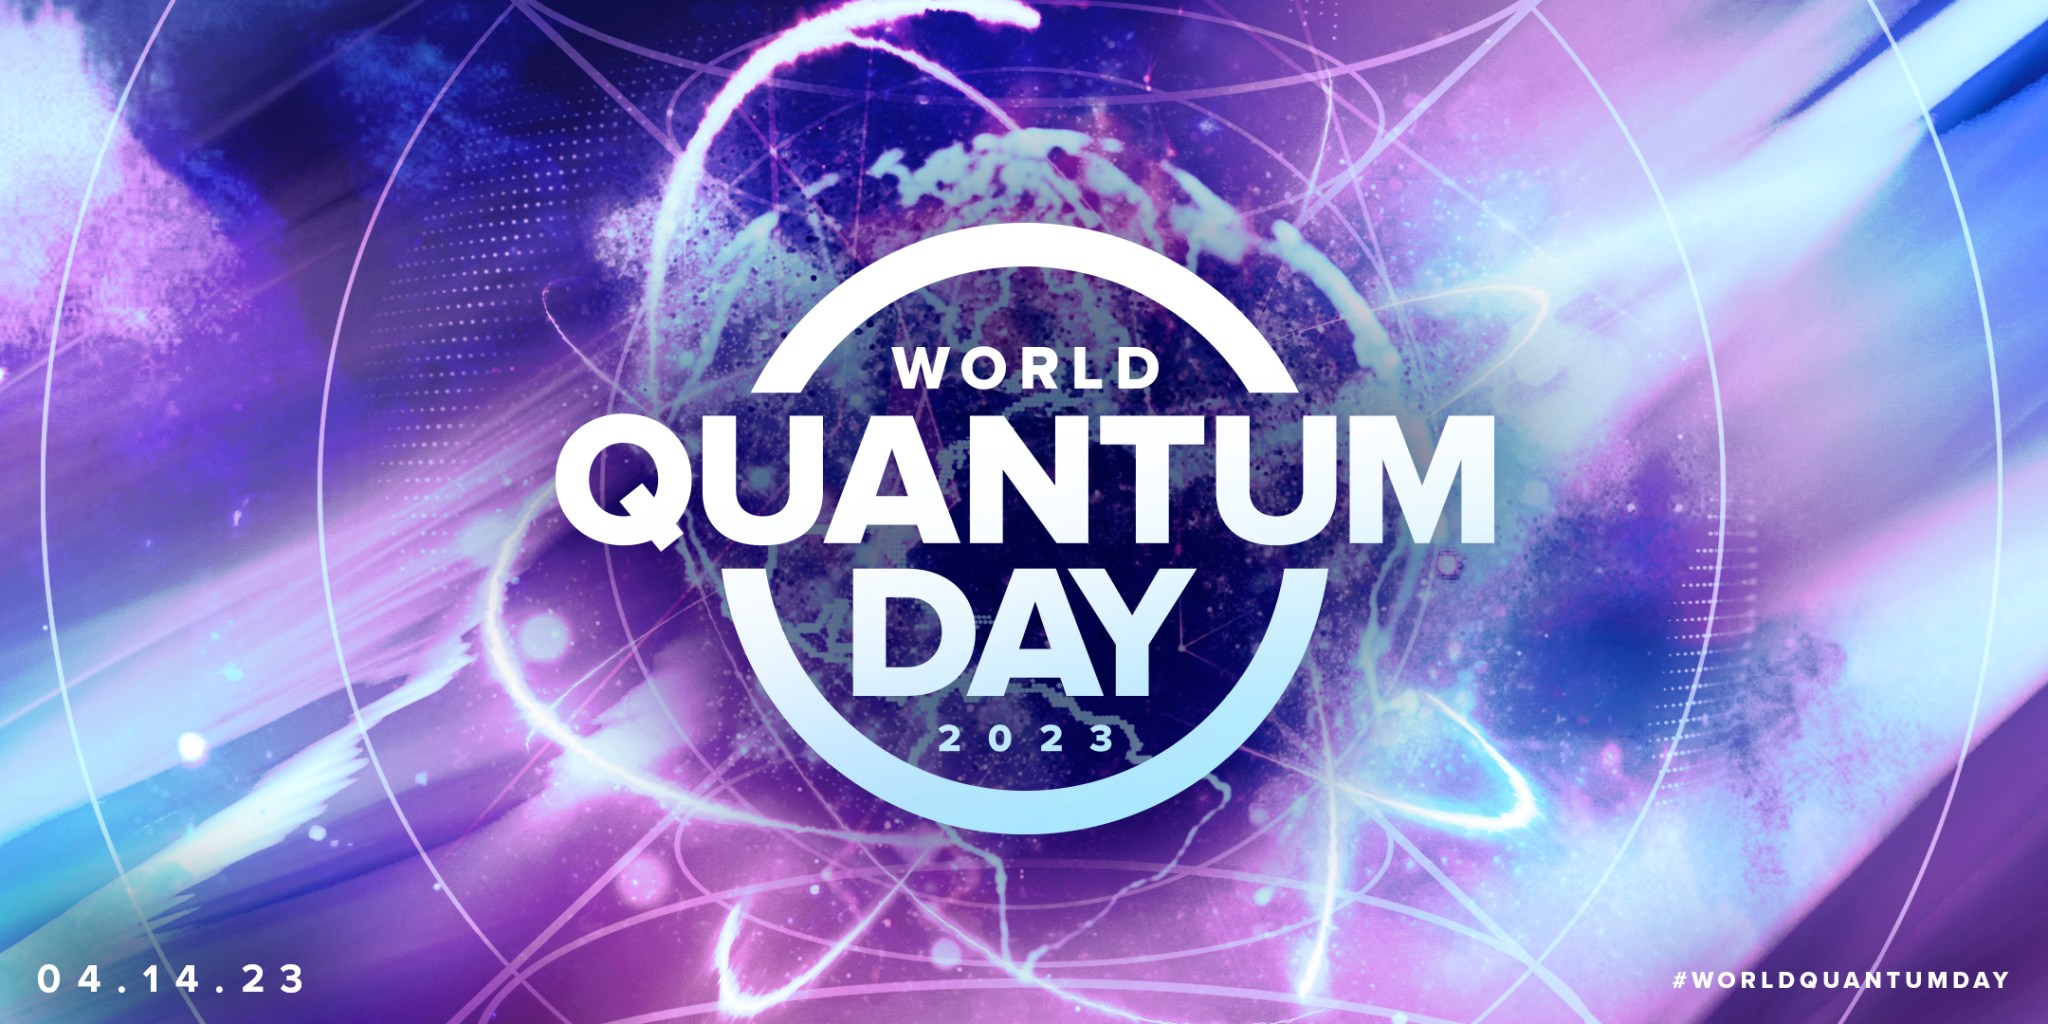 A purple graphic with text that reads: "World Quantum Day 2023"